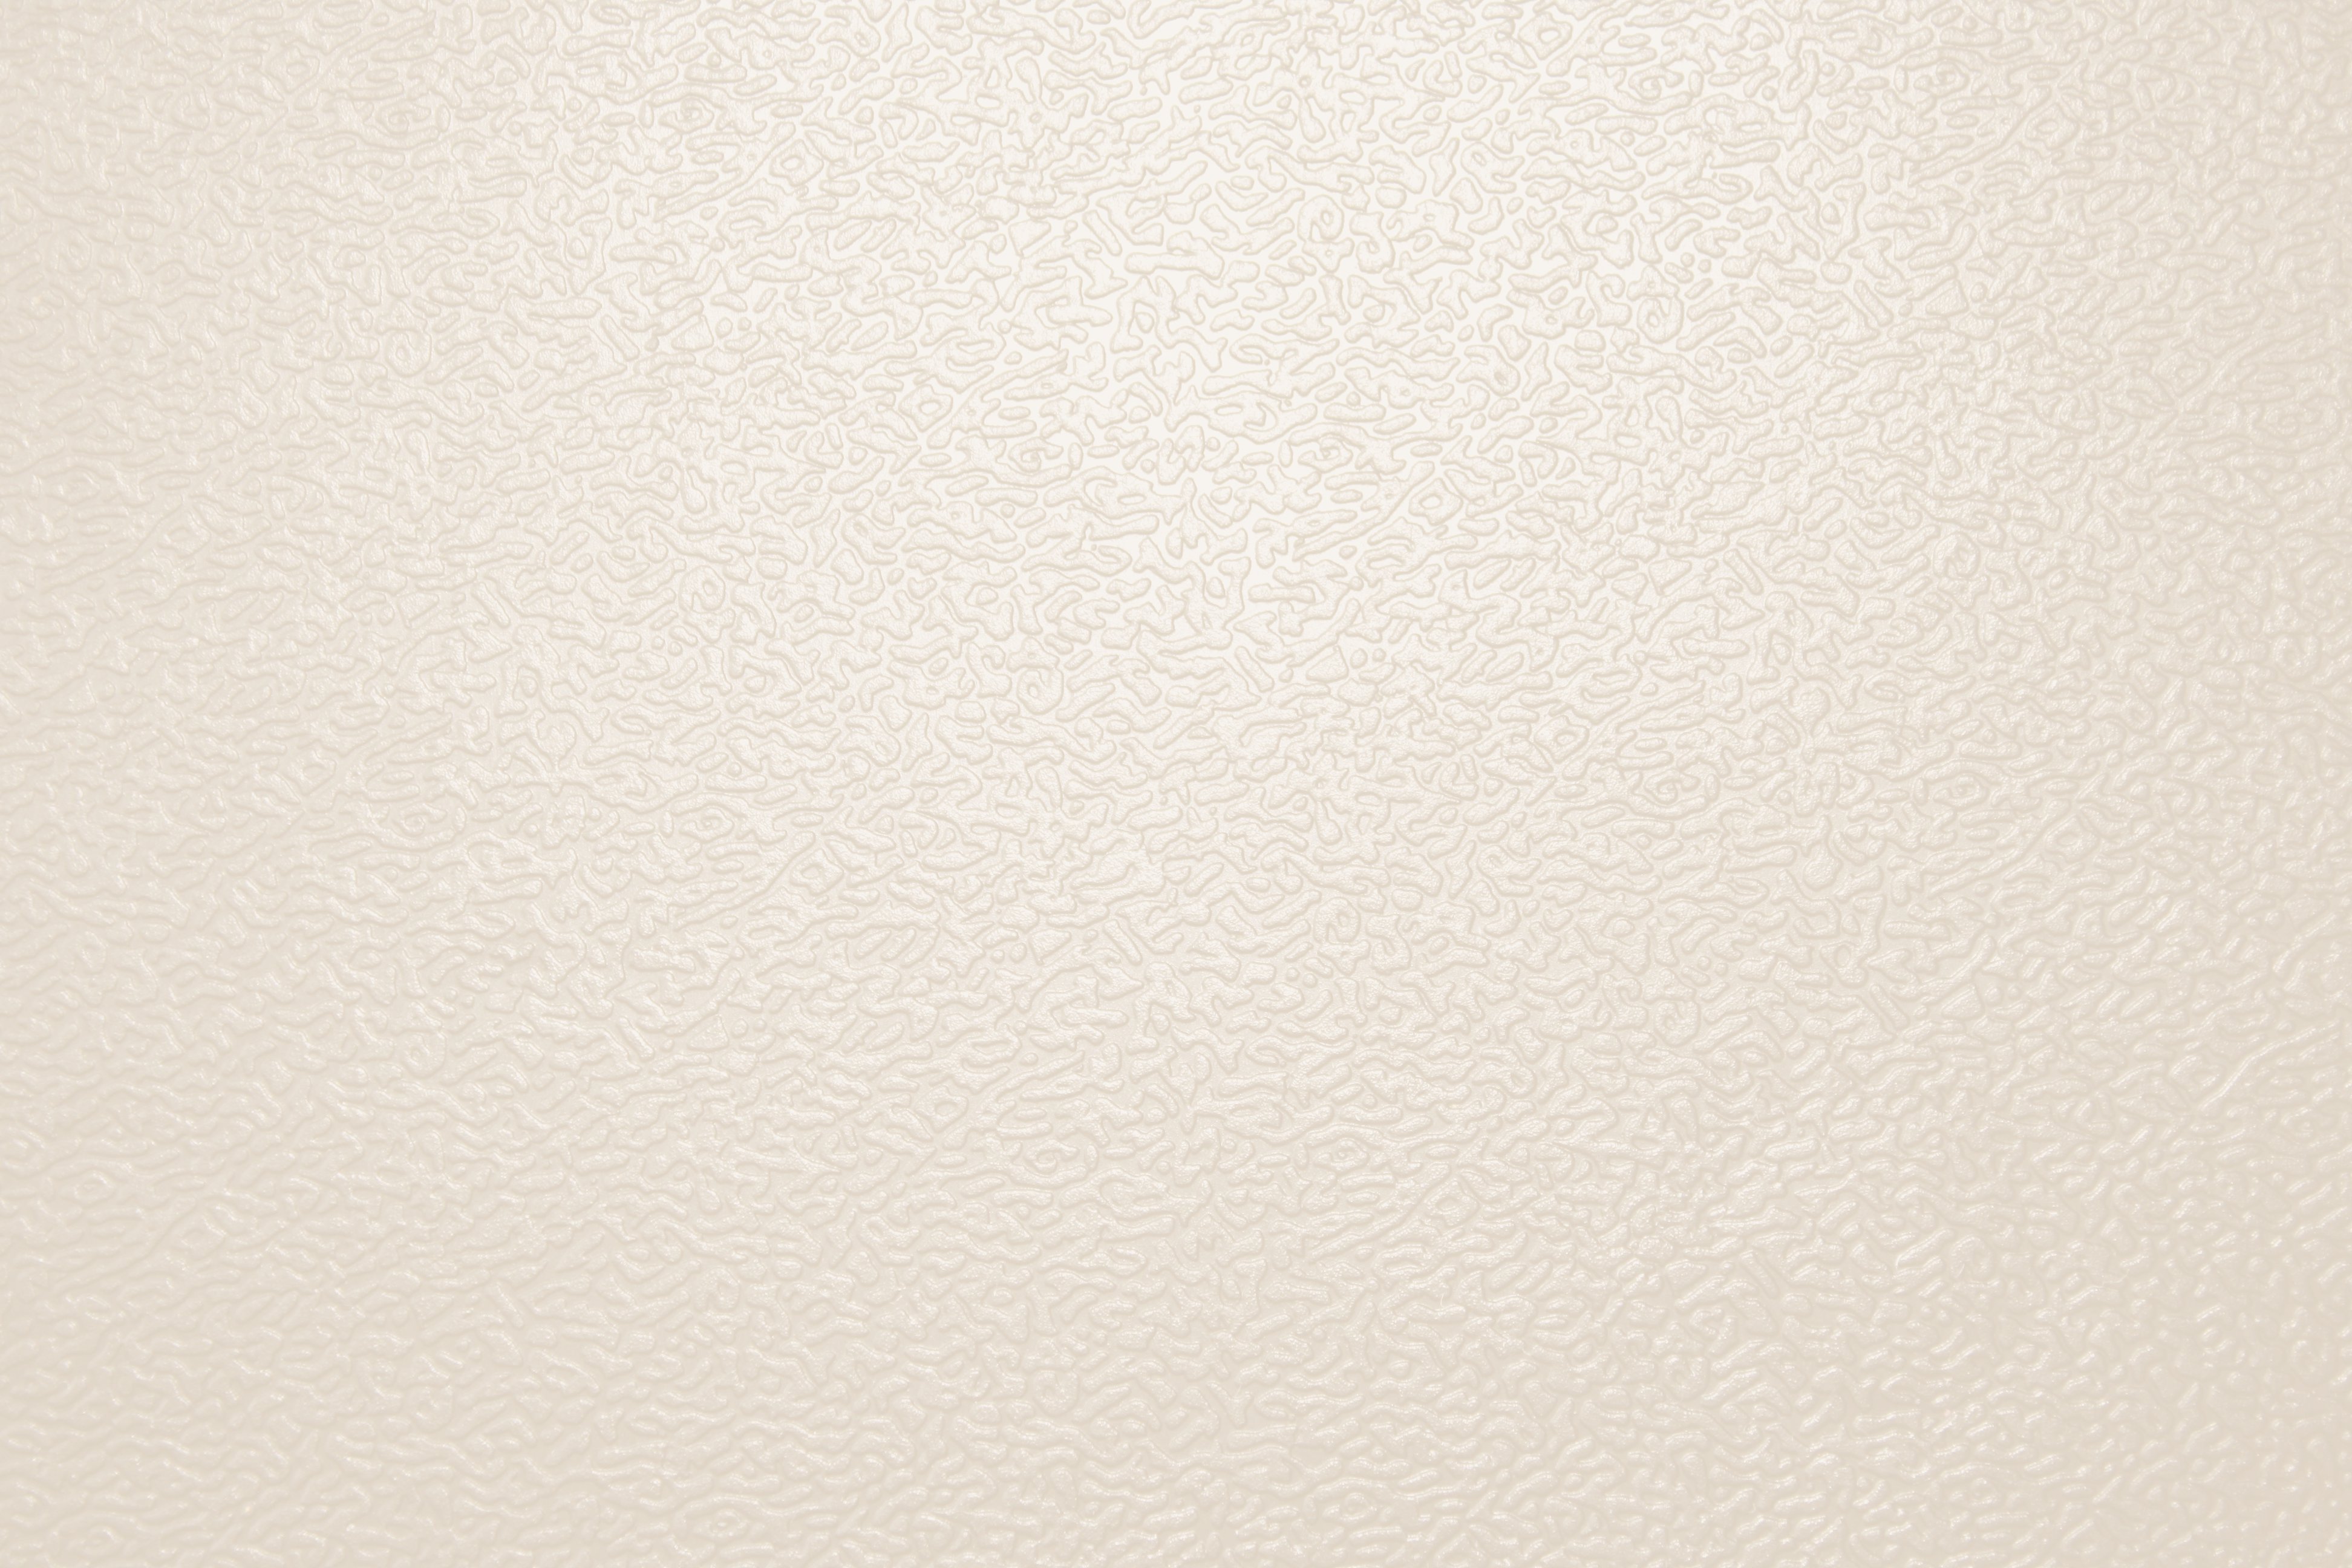 Textured Cream Colored Plastic Close Up High Resolution Photo